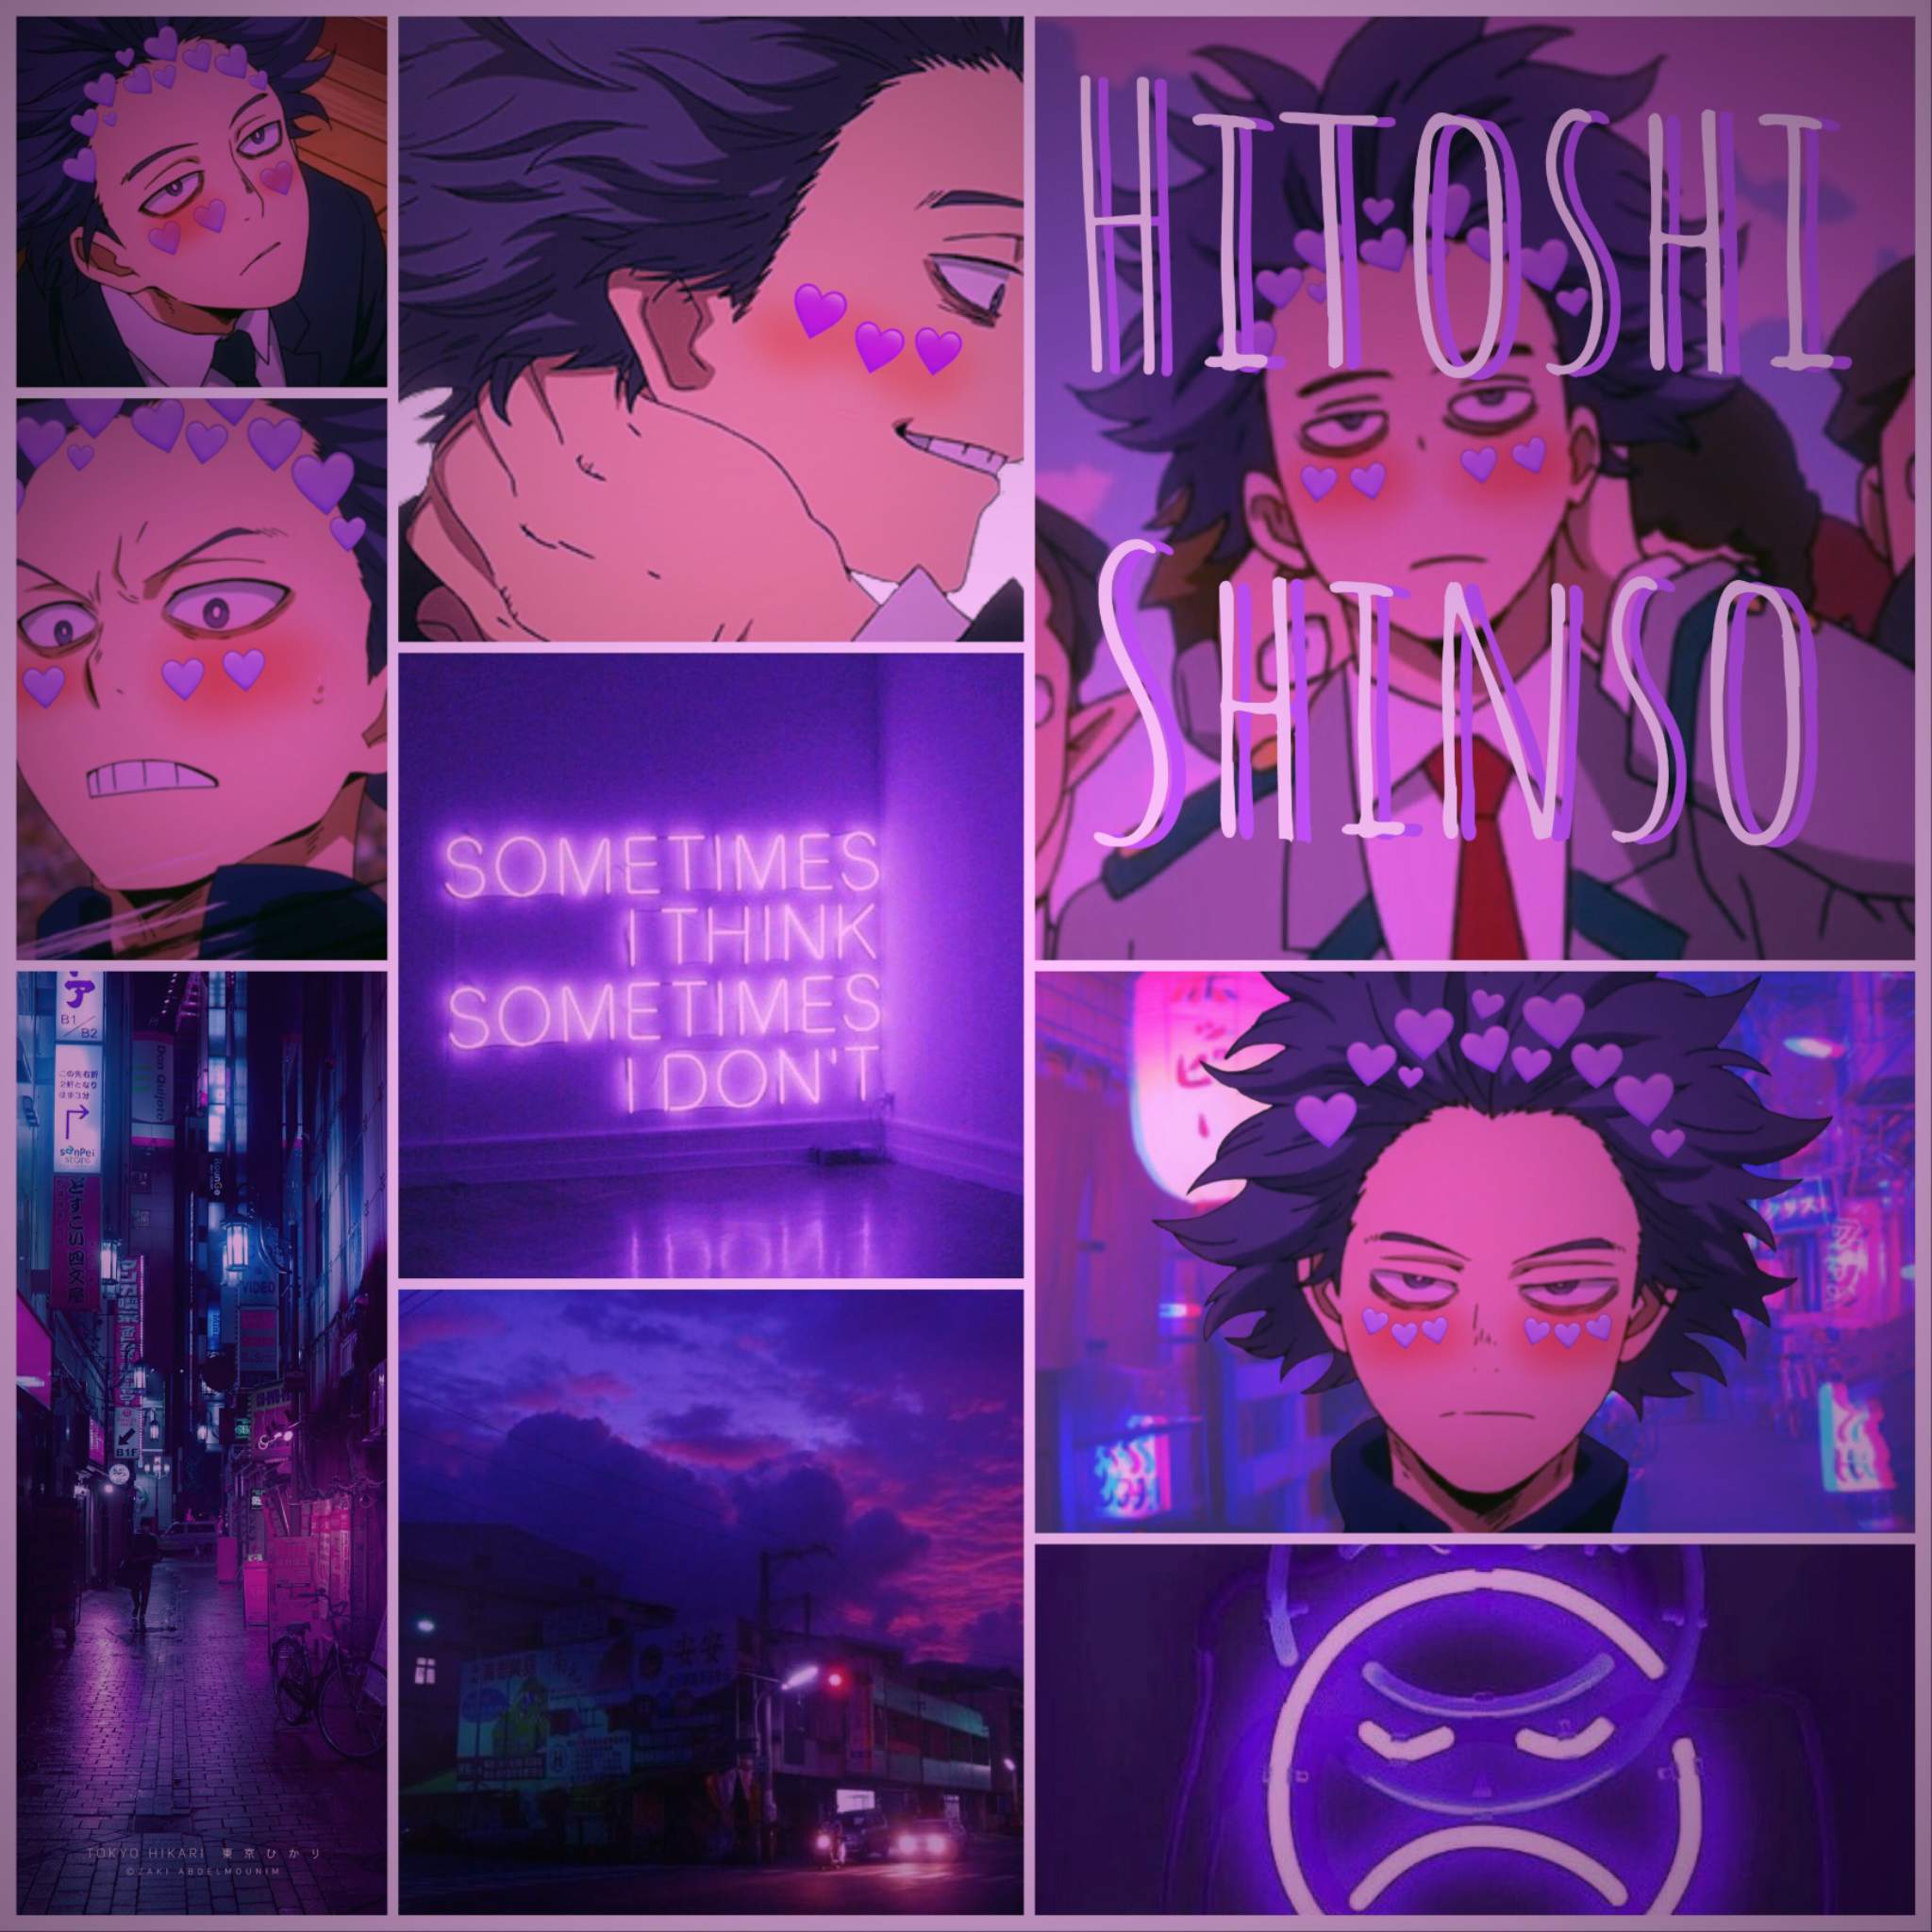 Hitoshi Shinso Wallpapers posted by Ryan Peltier